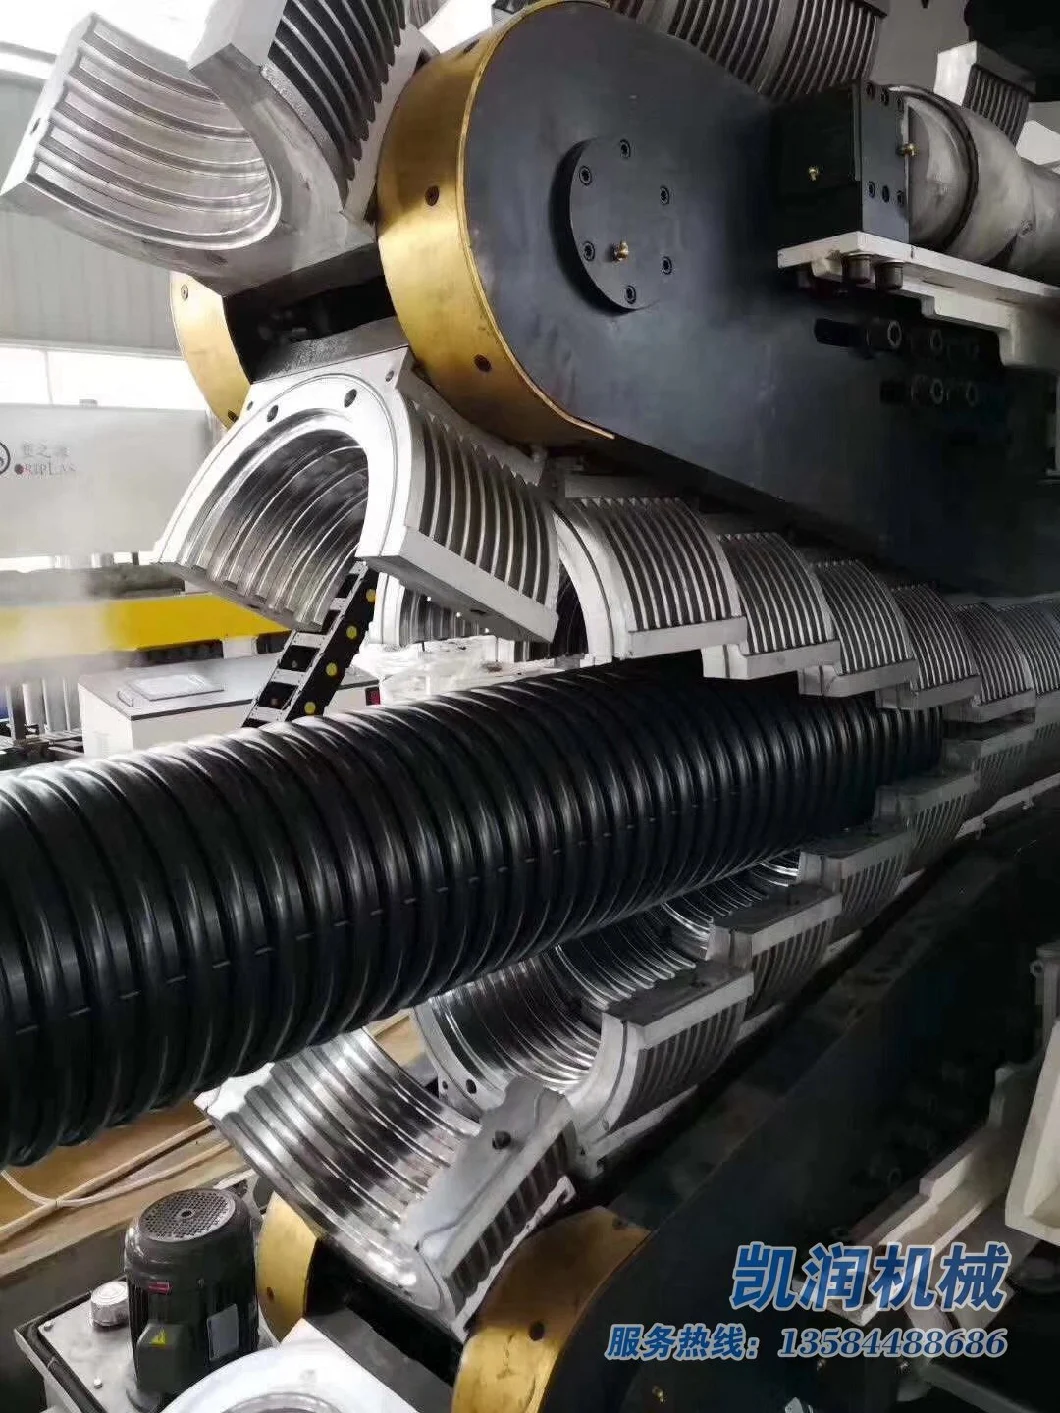 Reasonable Price and Best Quality HDPE Double Wall Corrugated Pipe Machine/Dwc Pipe Making Line